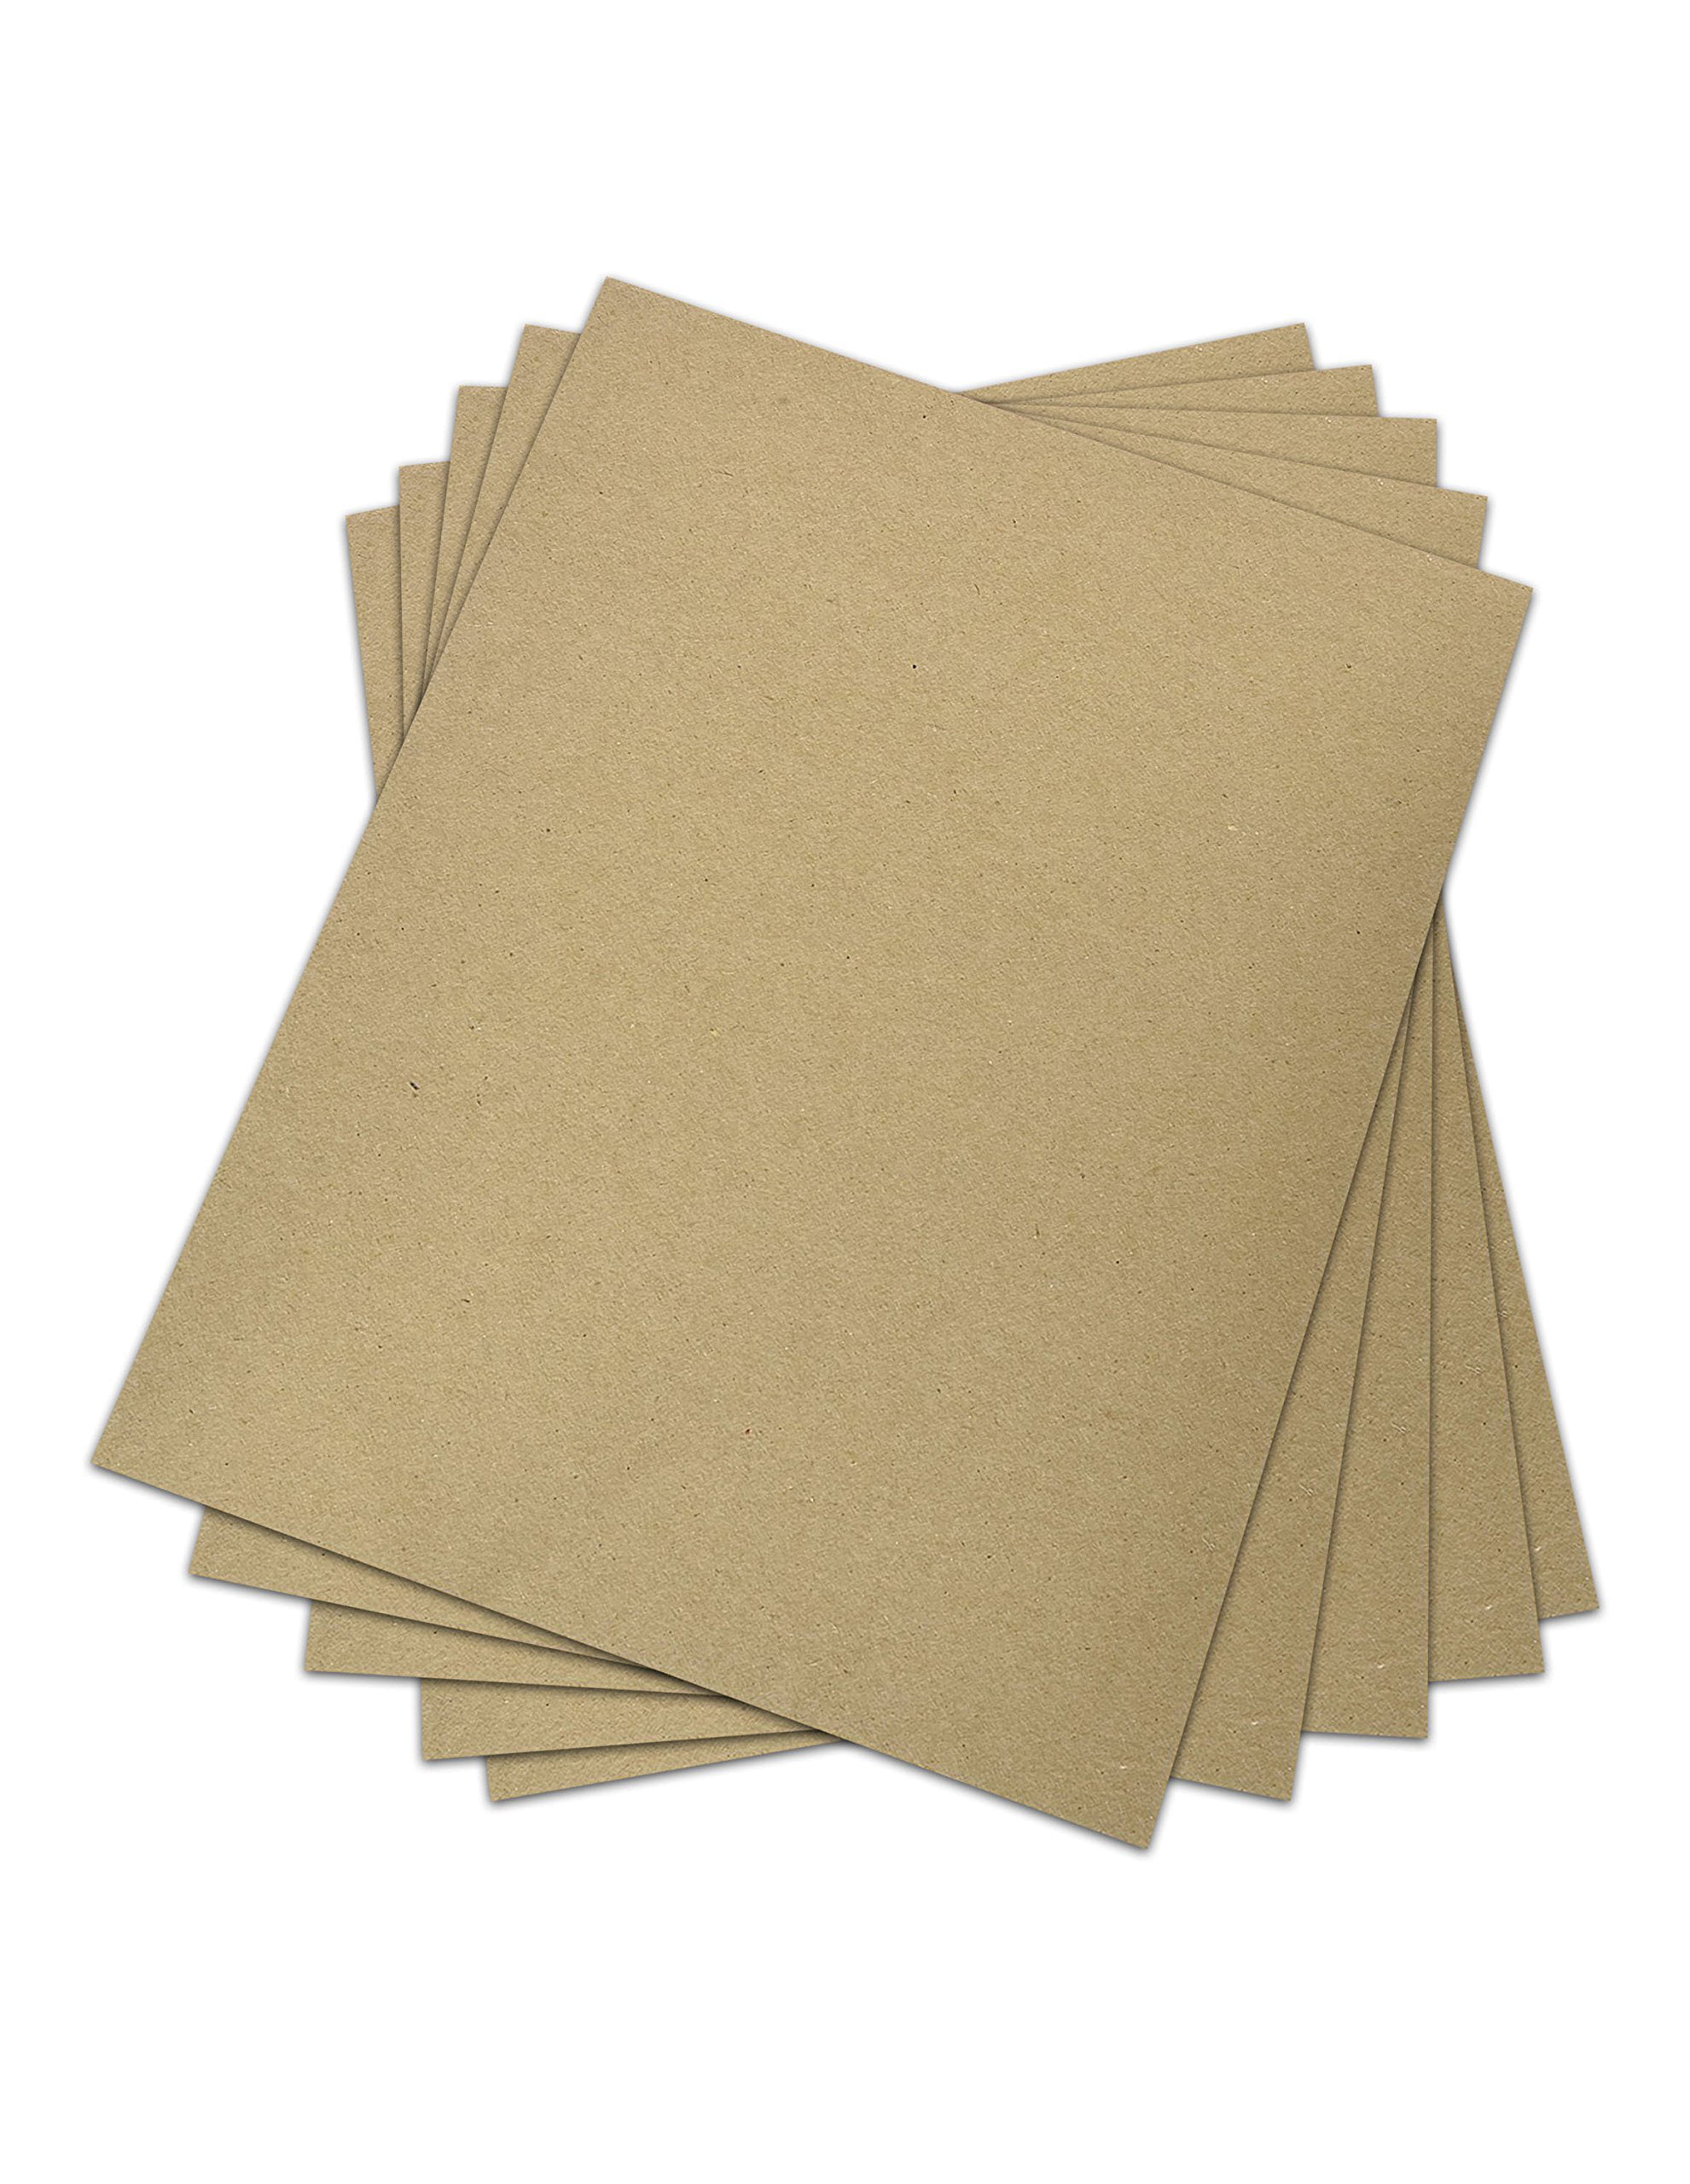 8.5 x 11 Inches 22 Point (.022) Kraft LIGHT WEIGHT CHIPBOARD SHEETS